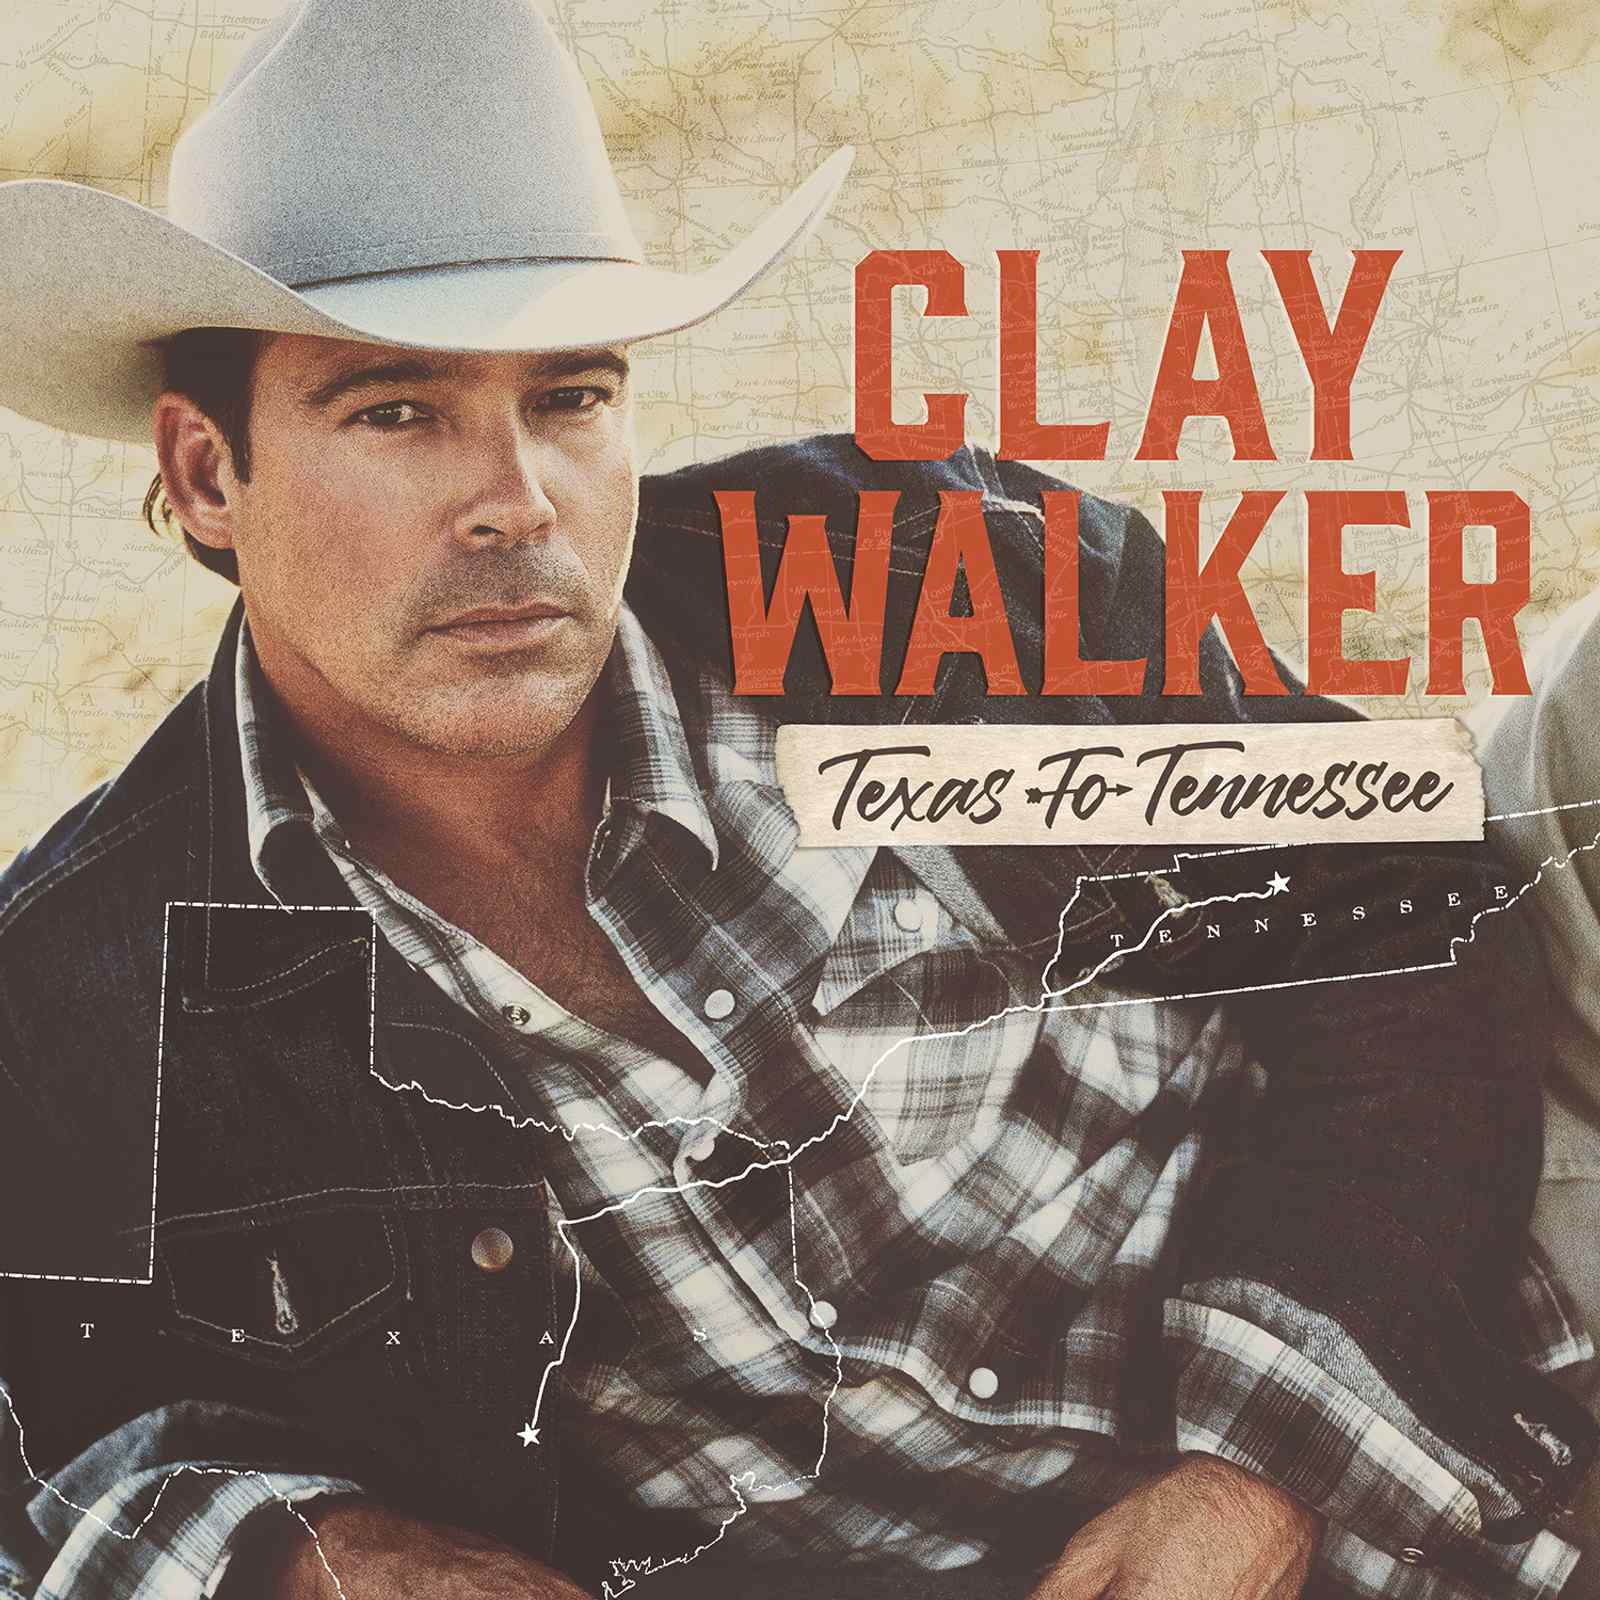 Texas To Tennessee by Clay Walker